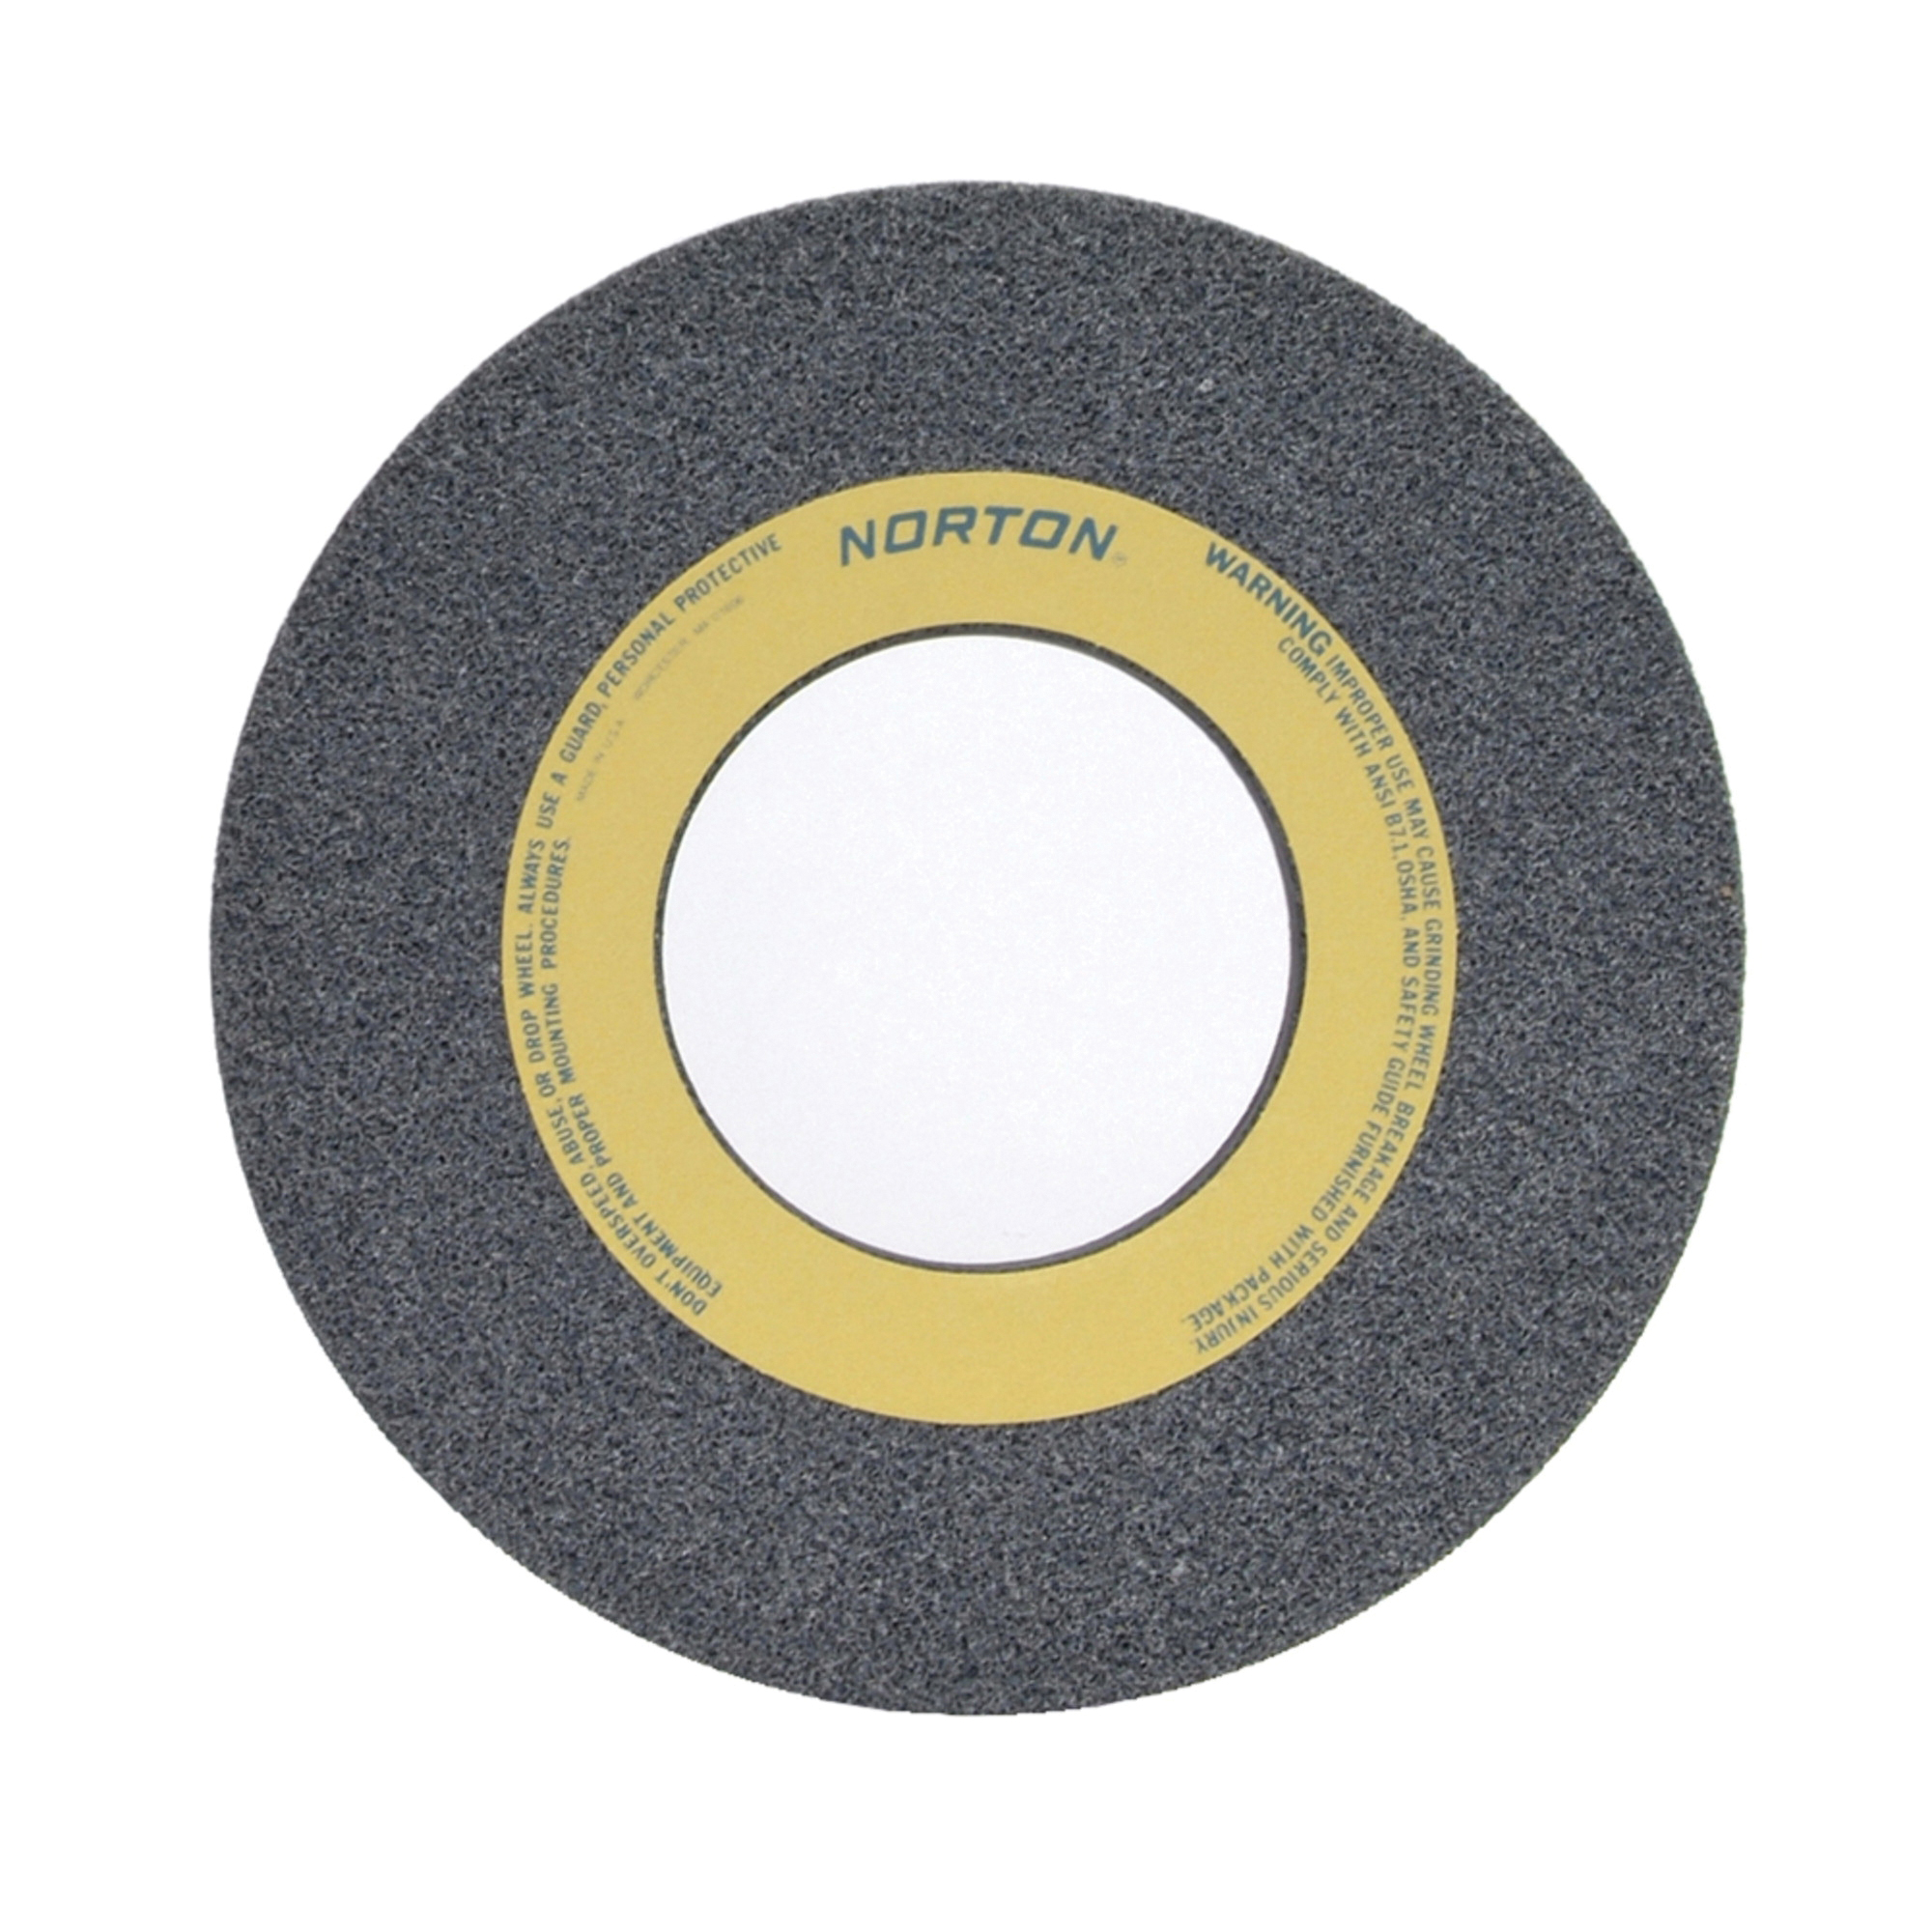 Norton® 66253263192 32A Straight Toolroom Wheel, 12 in Dia x 1-1/2 in THK, 5 in Center Hole, 46 Grit, Aluminum Oxide Abrasive